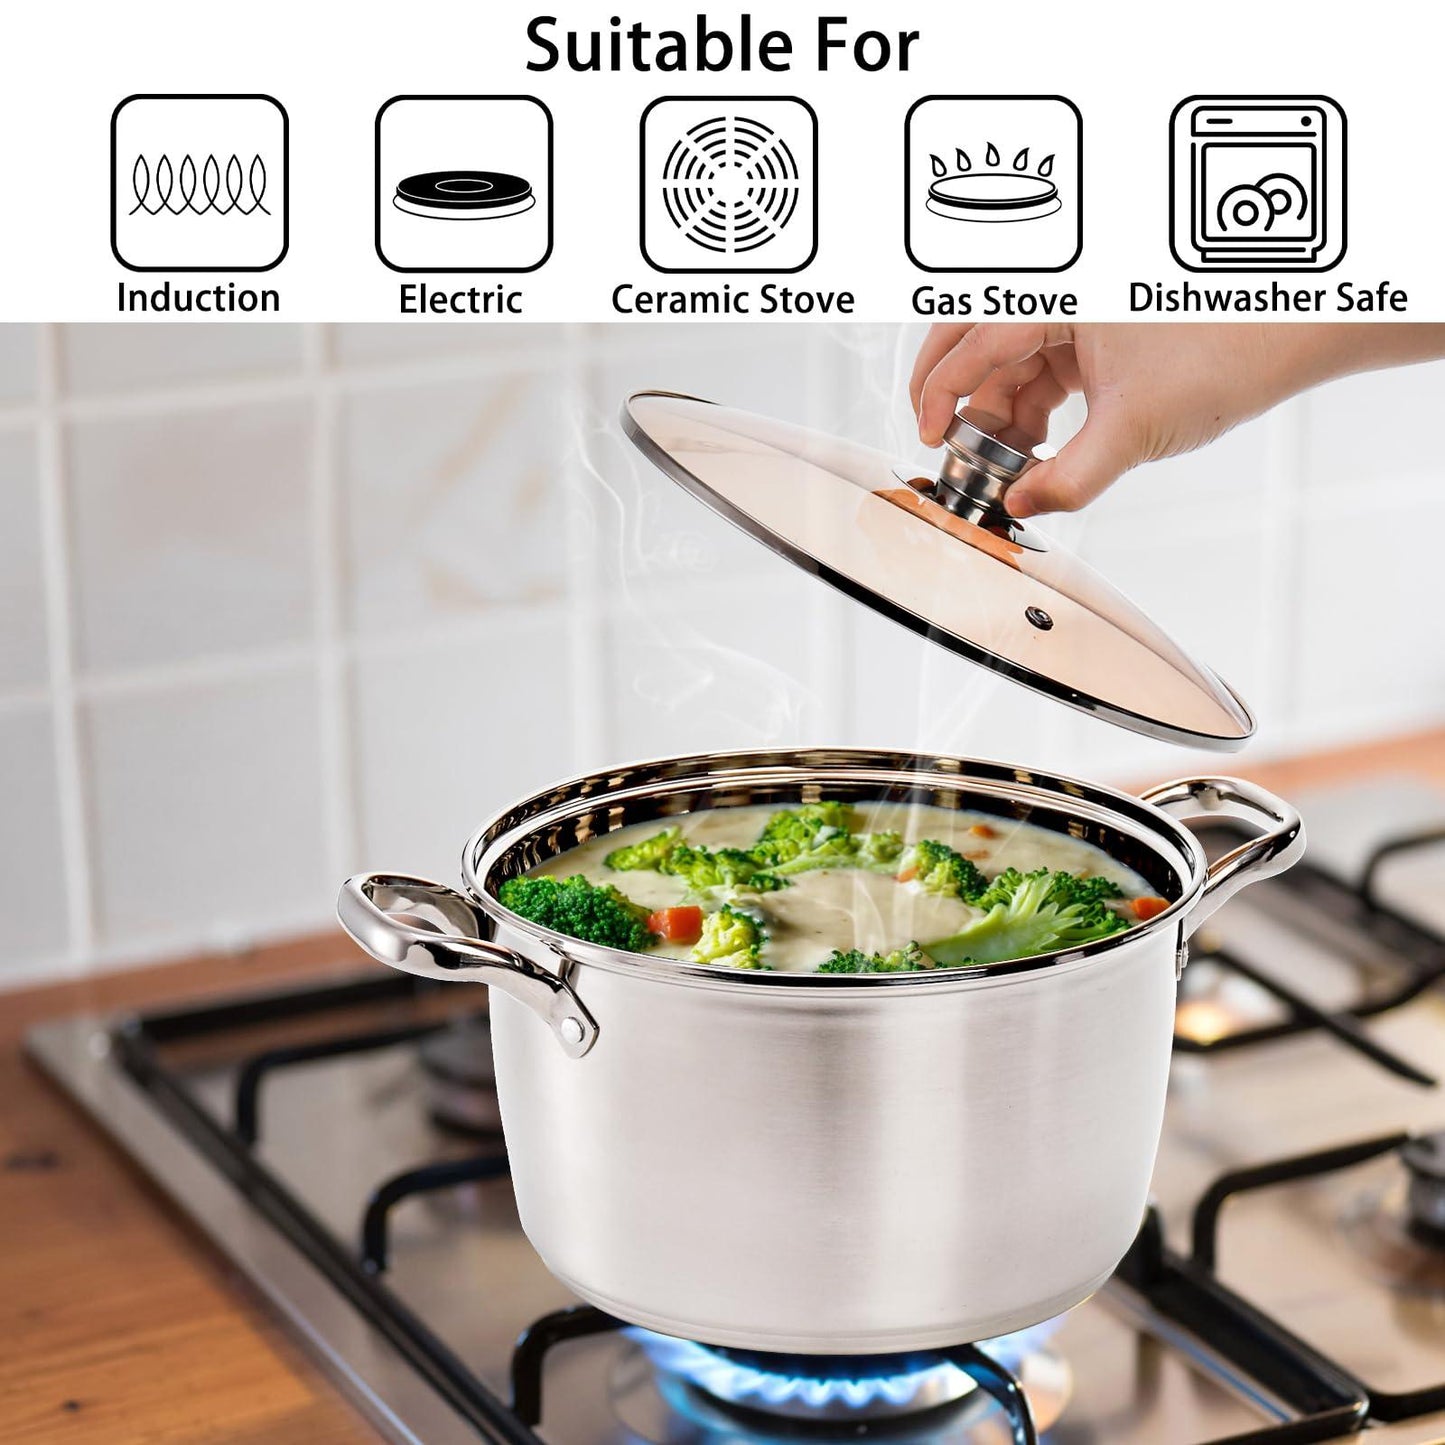 ZEAYEA Stainless Steel Stockpot, 5.8 Quart Cooking Pot with Glass Lid, Soup Pasta Pot with Double Heatproof Handles for Stew, Sauce and Reheat Food, Dishwasher Safe - CookCave